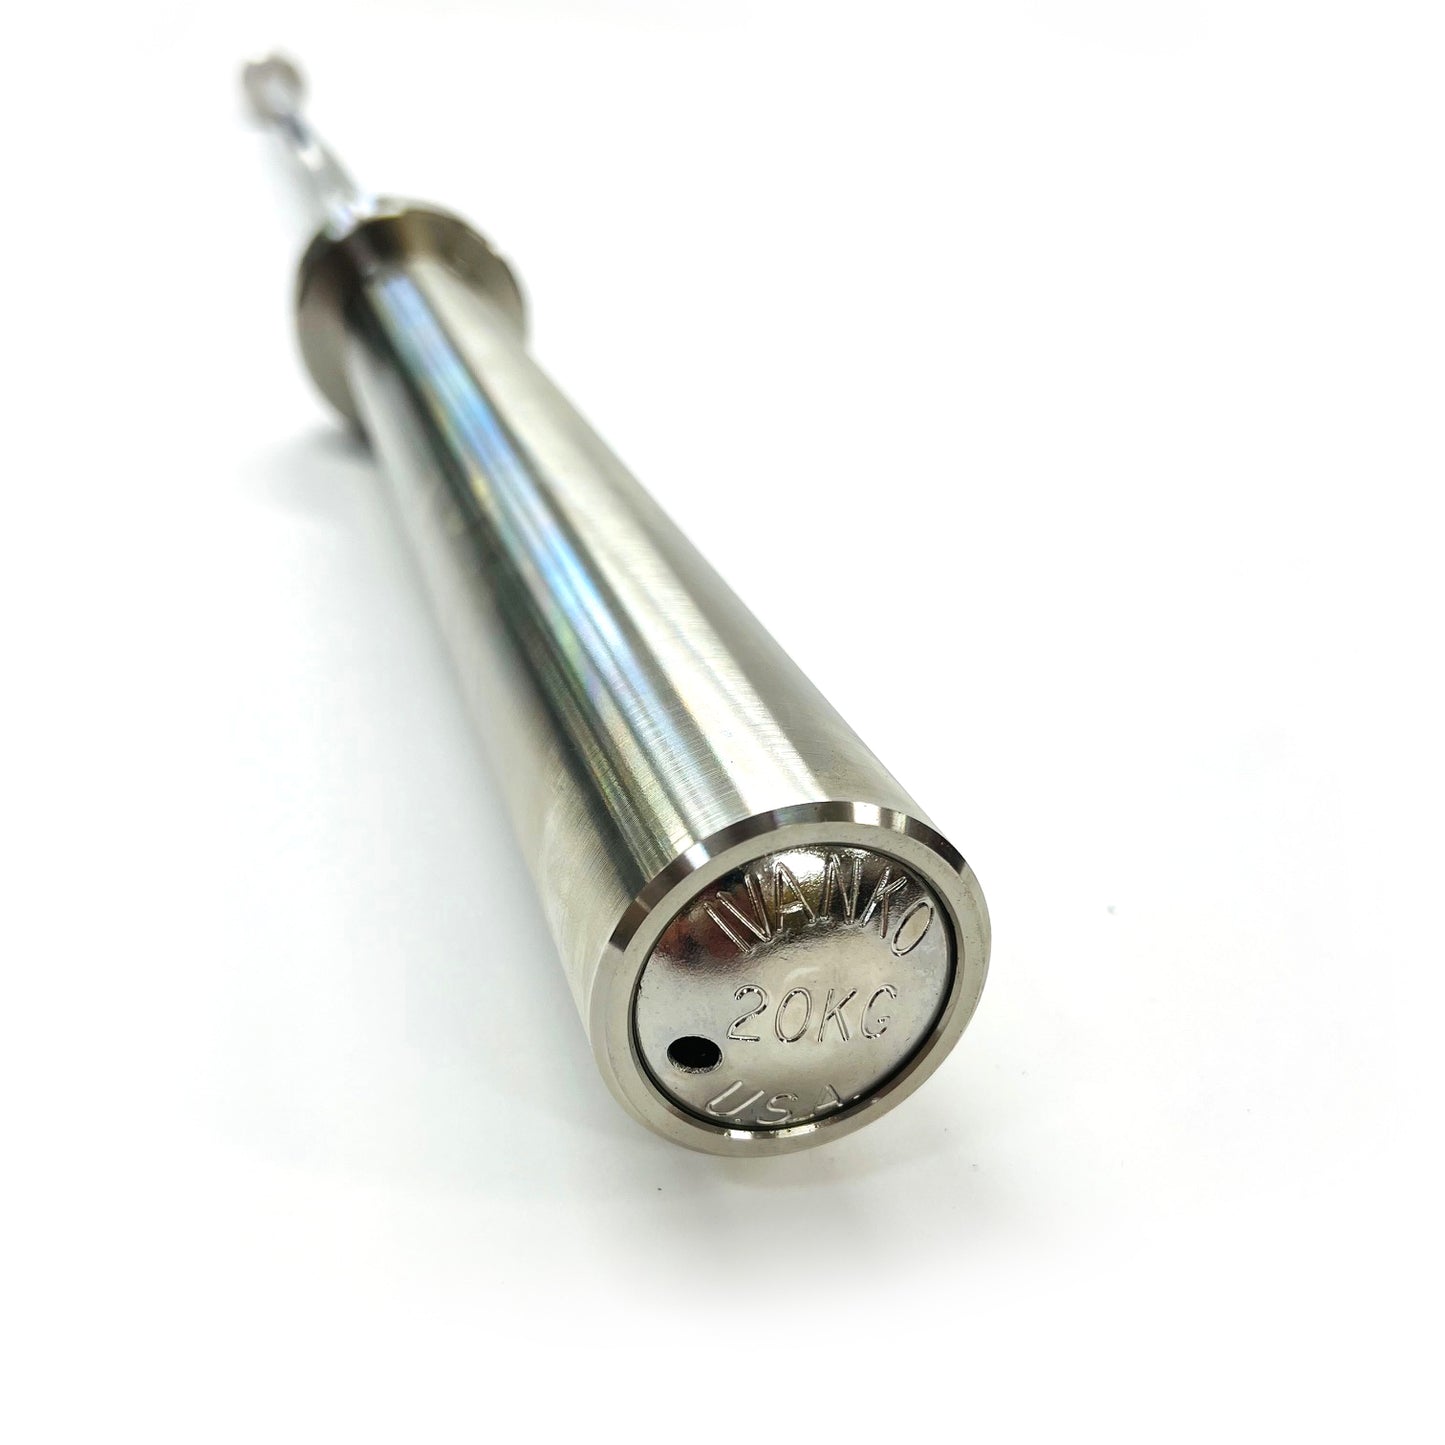 OBS-20KG - 28mm Stainless Olympic Bar (USA)